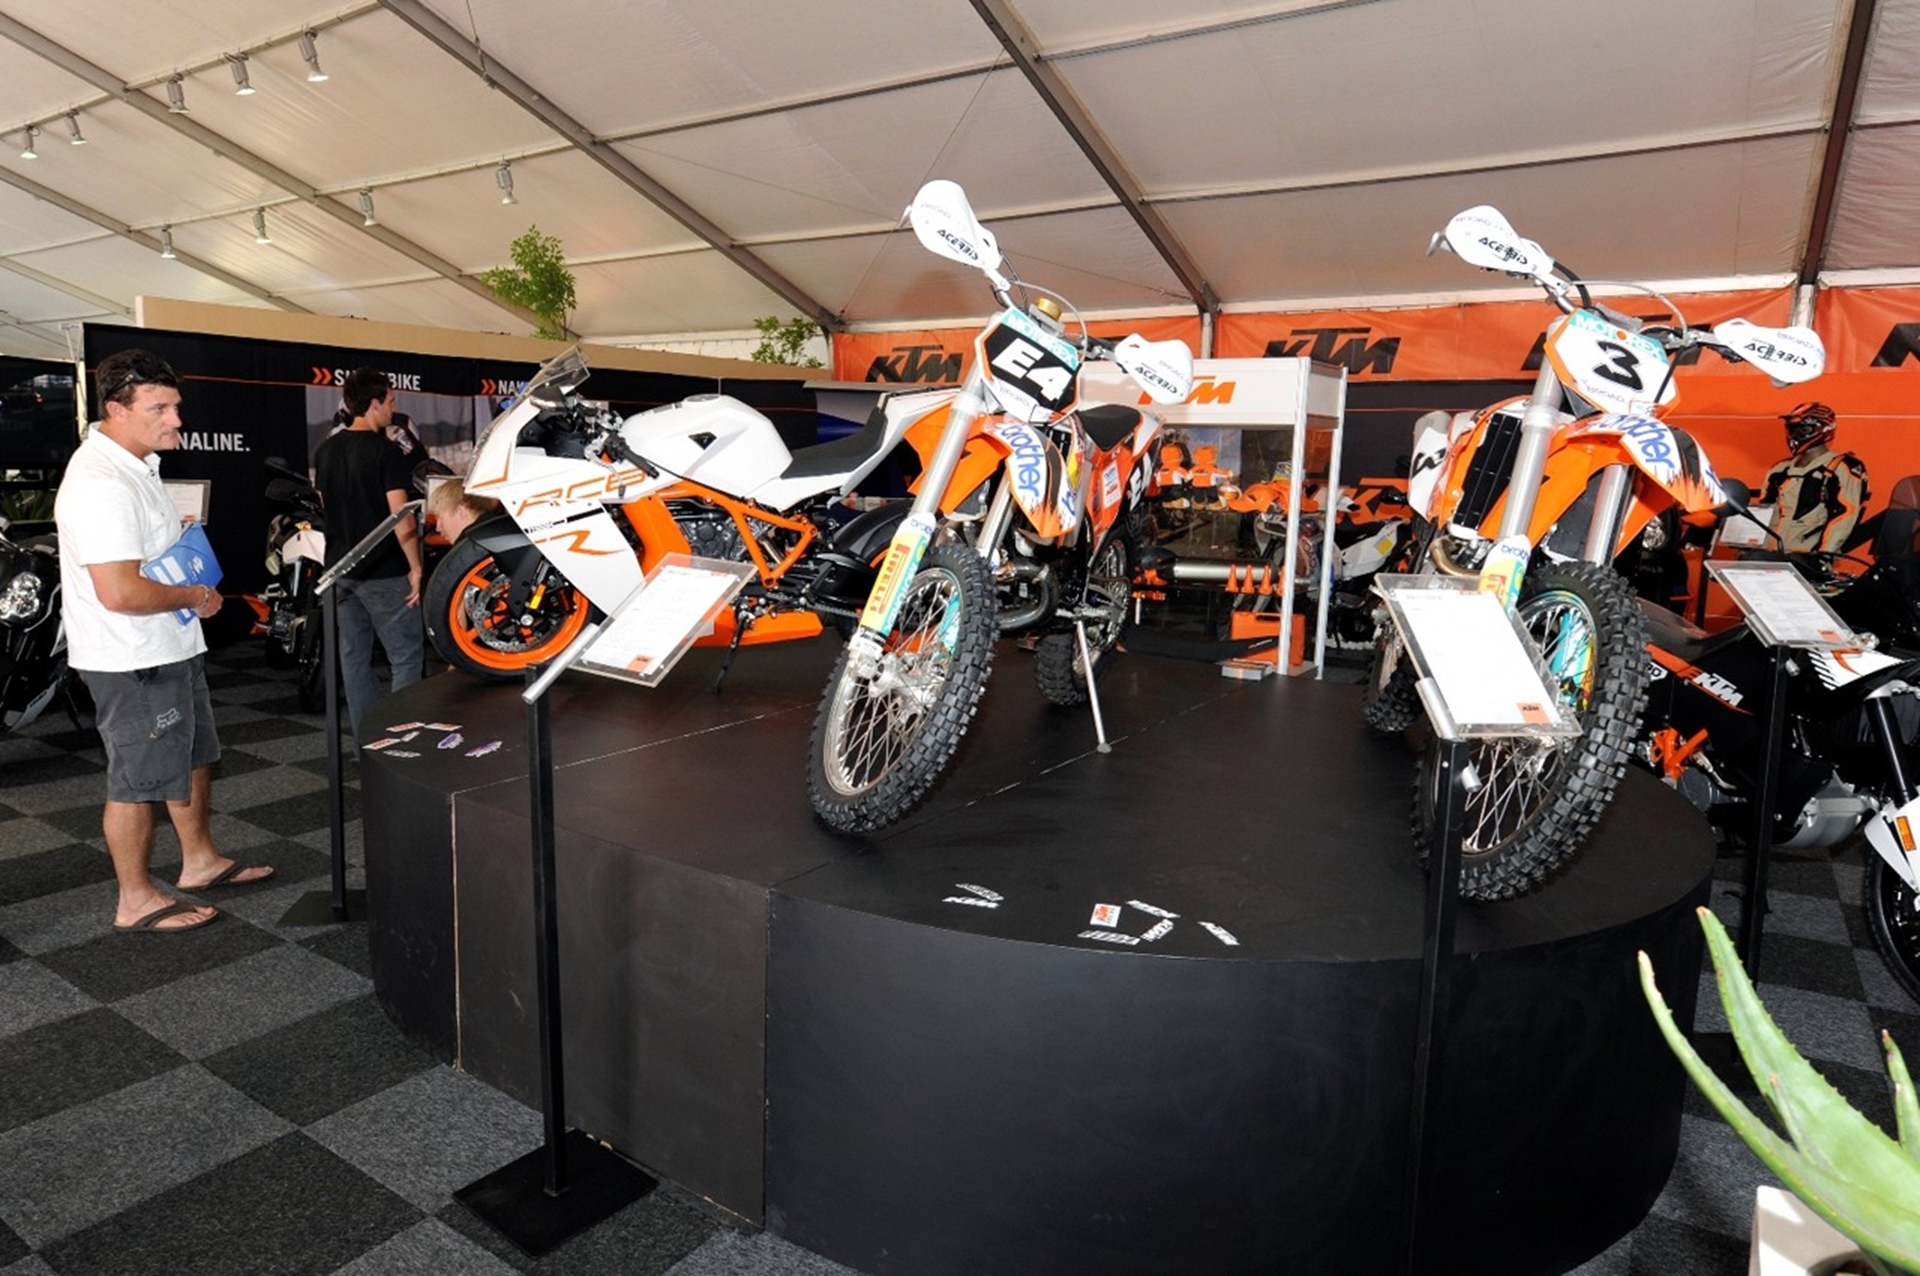 SOUTH AFRICA MOTORCYCLE SHOW AT EXPO CENTRE PROMISES TO BE BIGGEST AND BEST